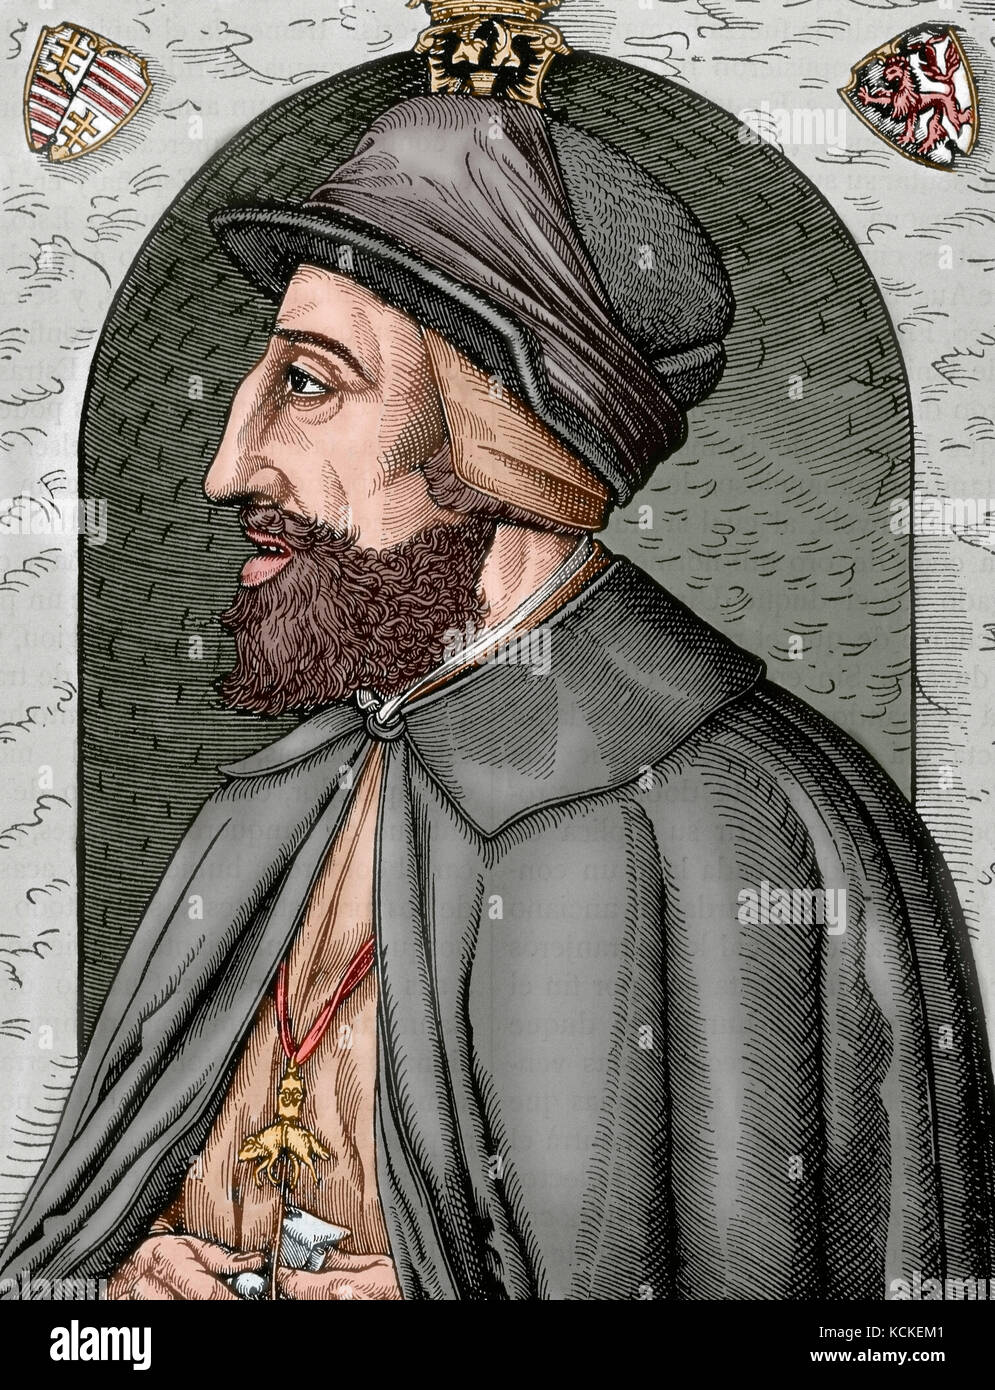 Charles V, Holy Roman Emperor (1500-1558). He was  ruler of both the Spanish Empire, as Charles I,  from 1516 and the Holy Roman Empire, as Charles V, from 1519. Portrait. Engraving. Colored. Stock Photo